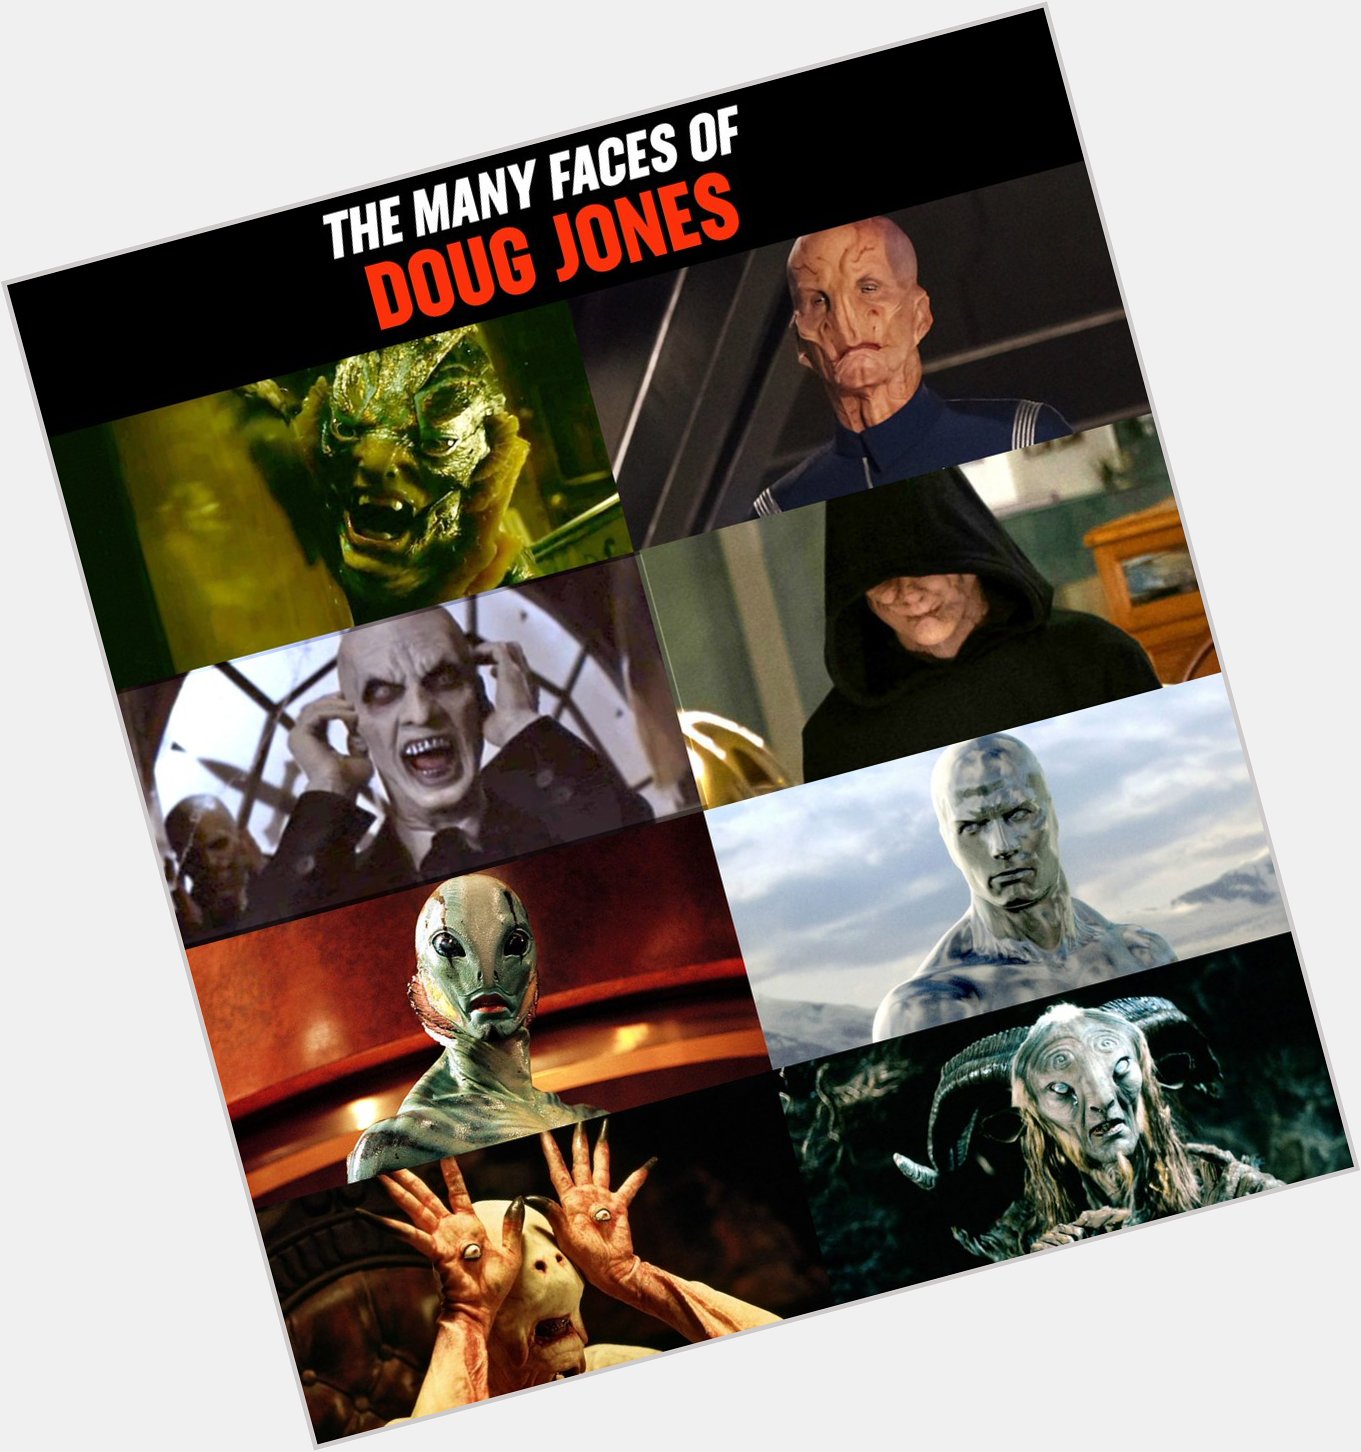 Happy birthday to Doug Jones and all of his many faces! 